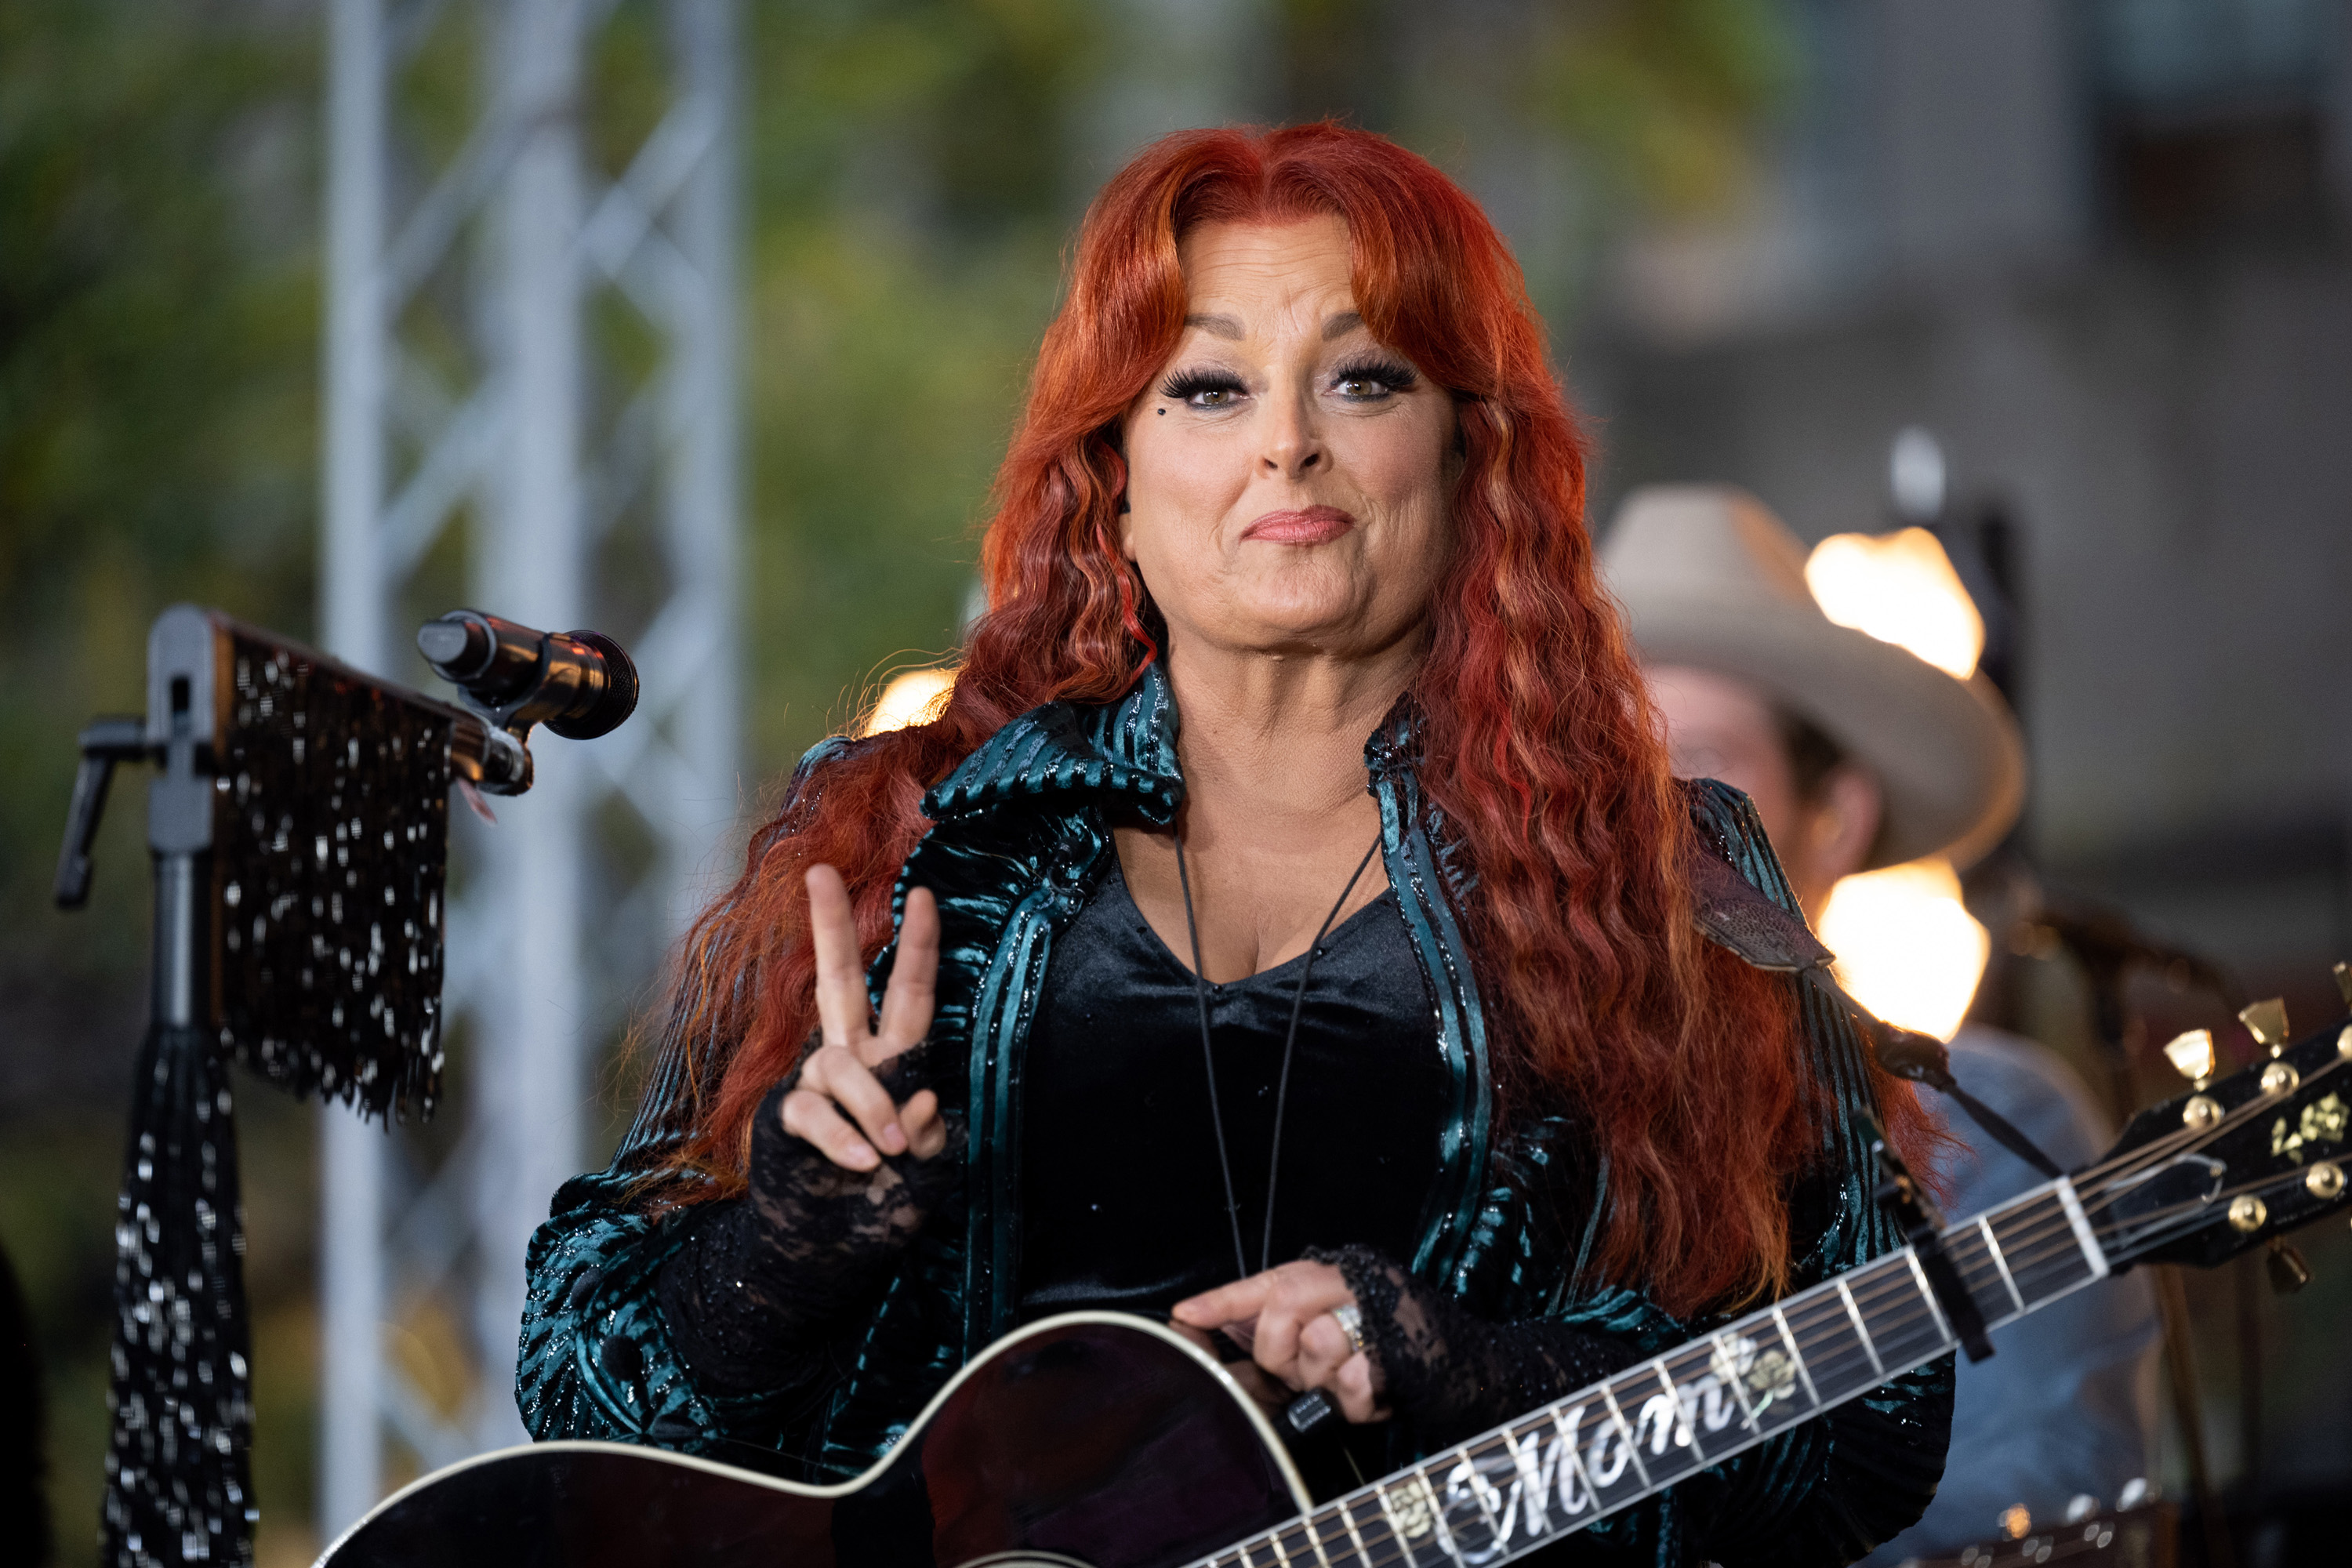 Wynonna Judd on October 24, 2022 | Source: Getty Images